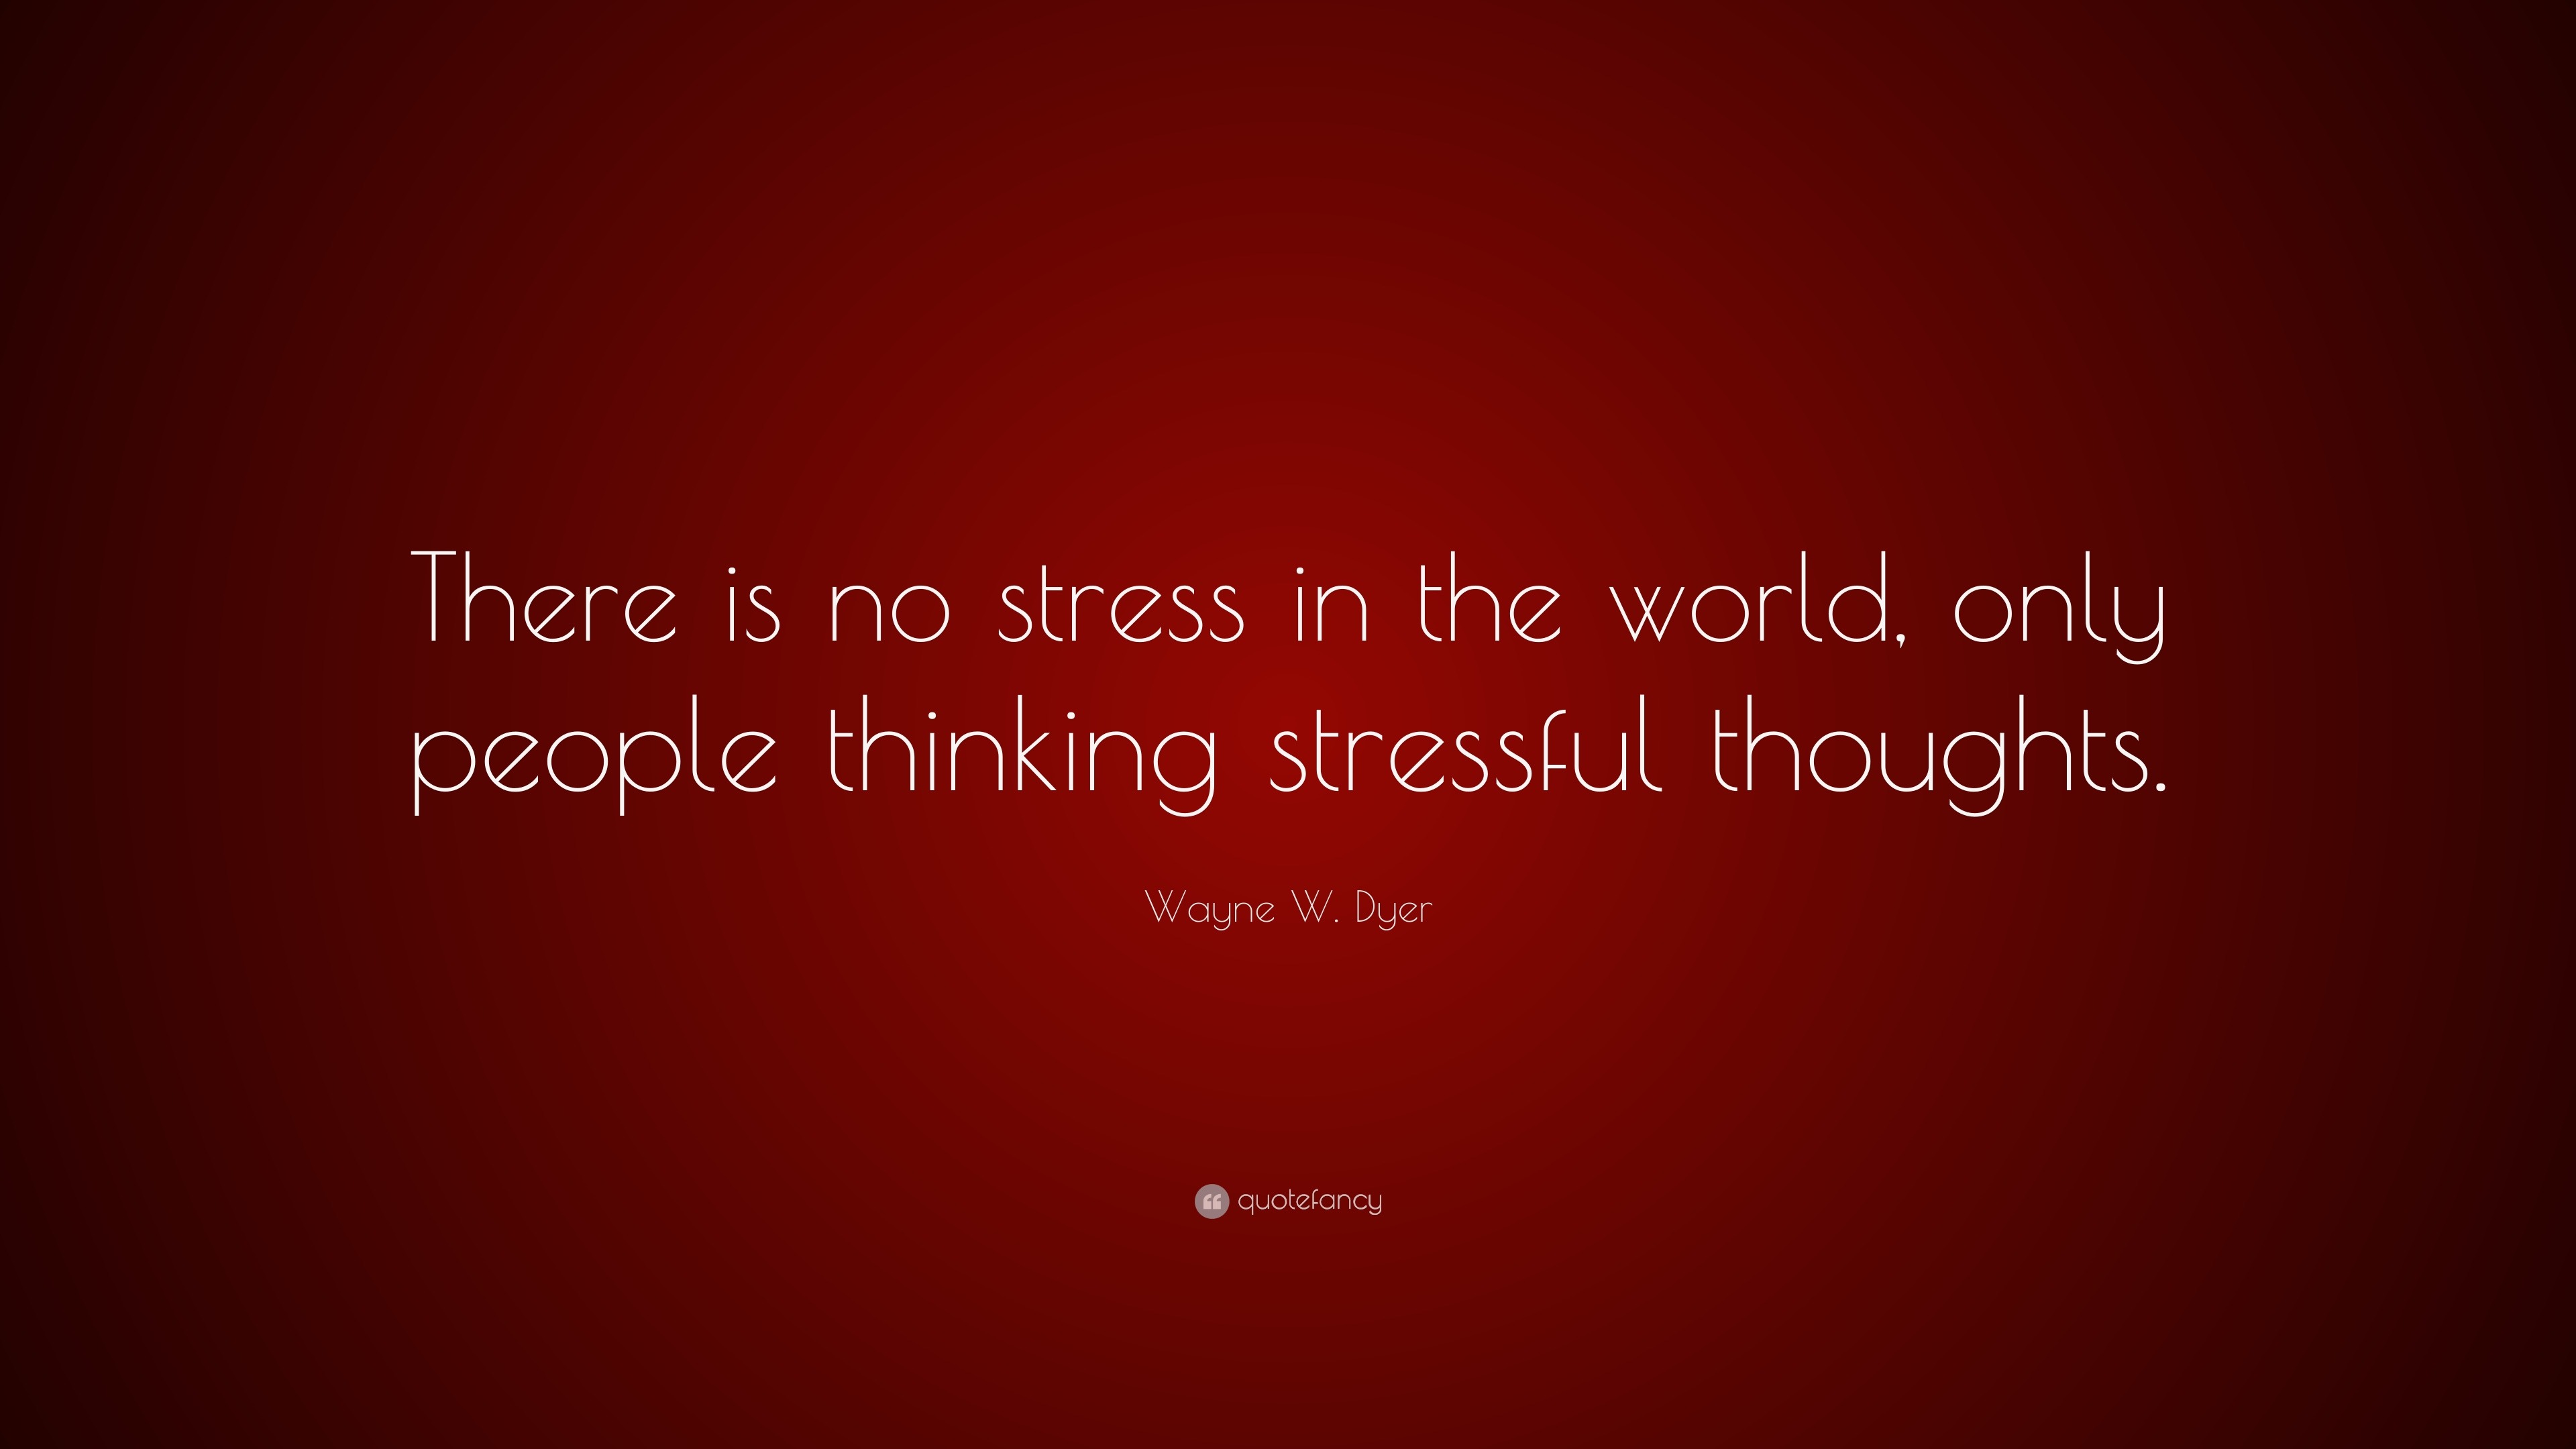 Wayne W. Dyer Quote: “There is no stress in the world, only people thinking  stressful thoughts.”